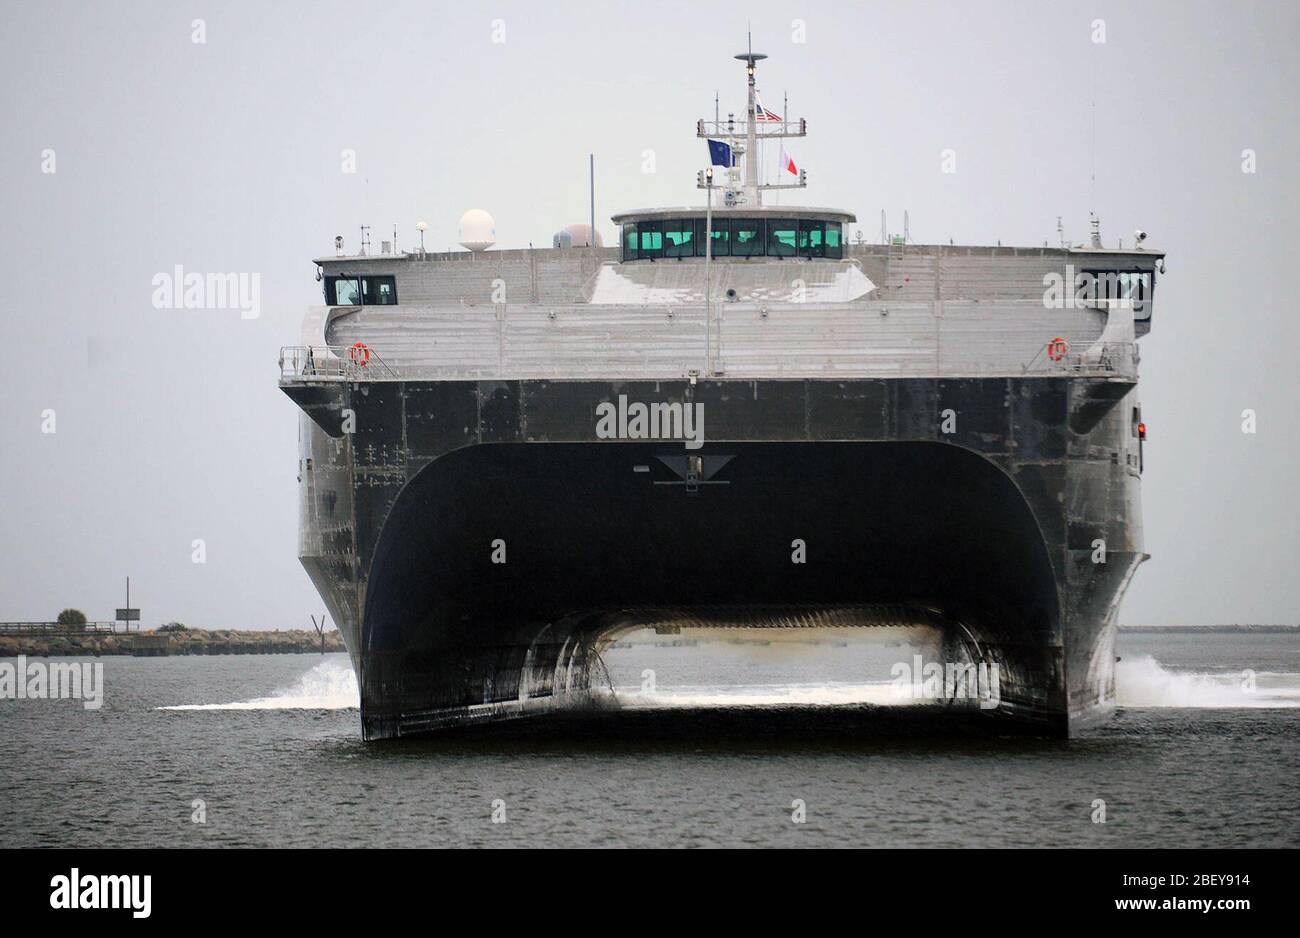 MAYPORT, Fla. (Feb. 14, 2013) The Military Sealift Command joint high-speed vessel USNS Spearhead (JHSV-1) pulls into Naval Station Mayport to be inspected by Rear Adm. Sinclair M. Harris, commander of U.S. 4th Fleet. Spearhead is the first of of nine Navy joint high-speed vessels and is designed for rapid intra-theater transport of troops and military equipment. Stock Photo